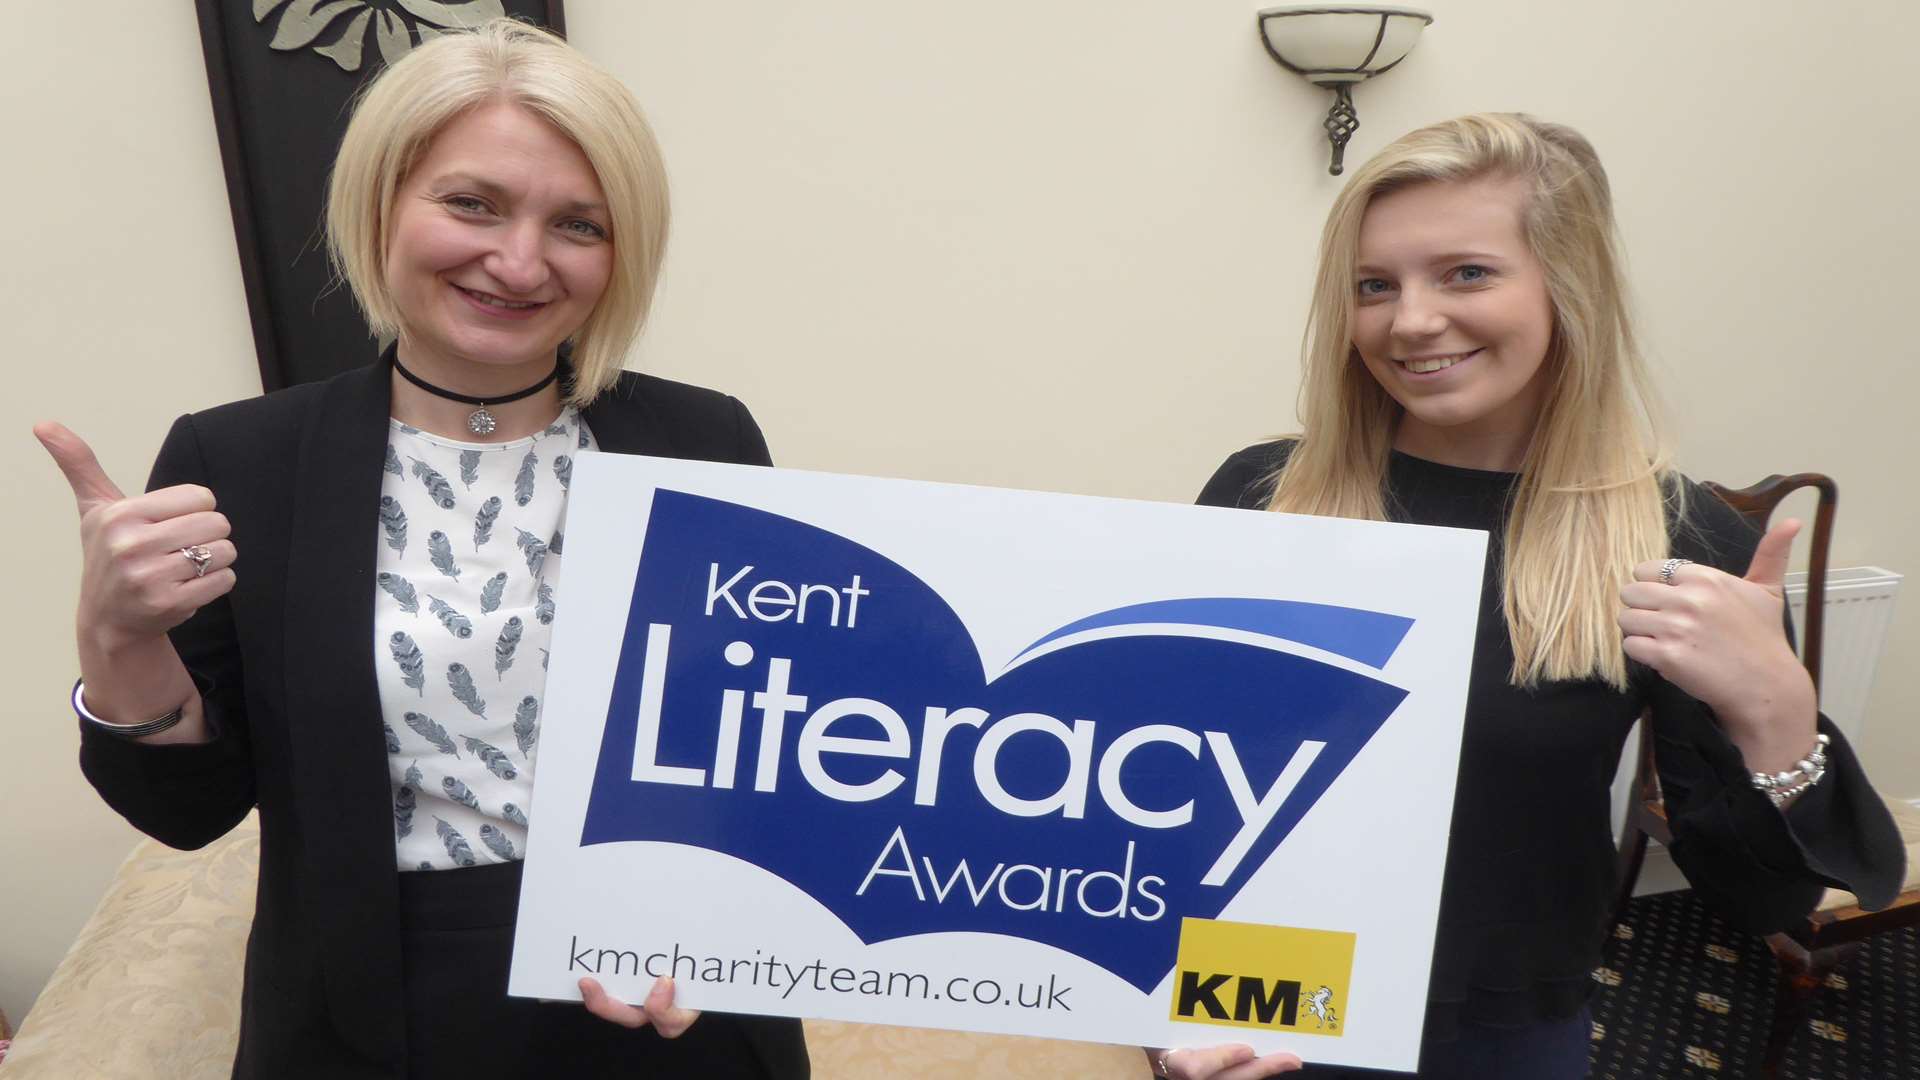 Sarah-Jane Leipnik and Camilla Braybrook of Golding Vision which is backing the Kent Literacy Awards 2017.